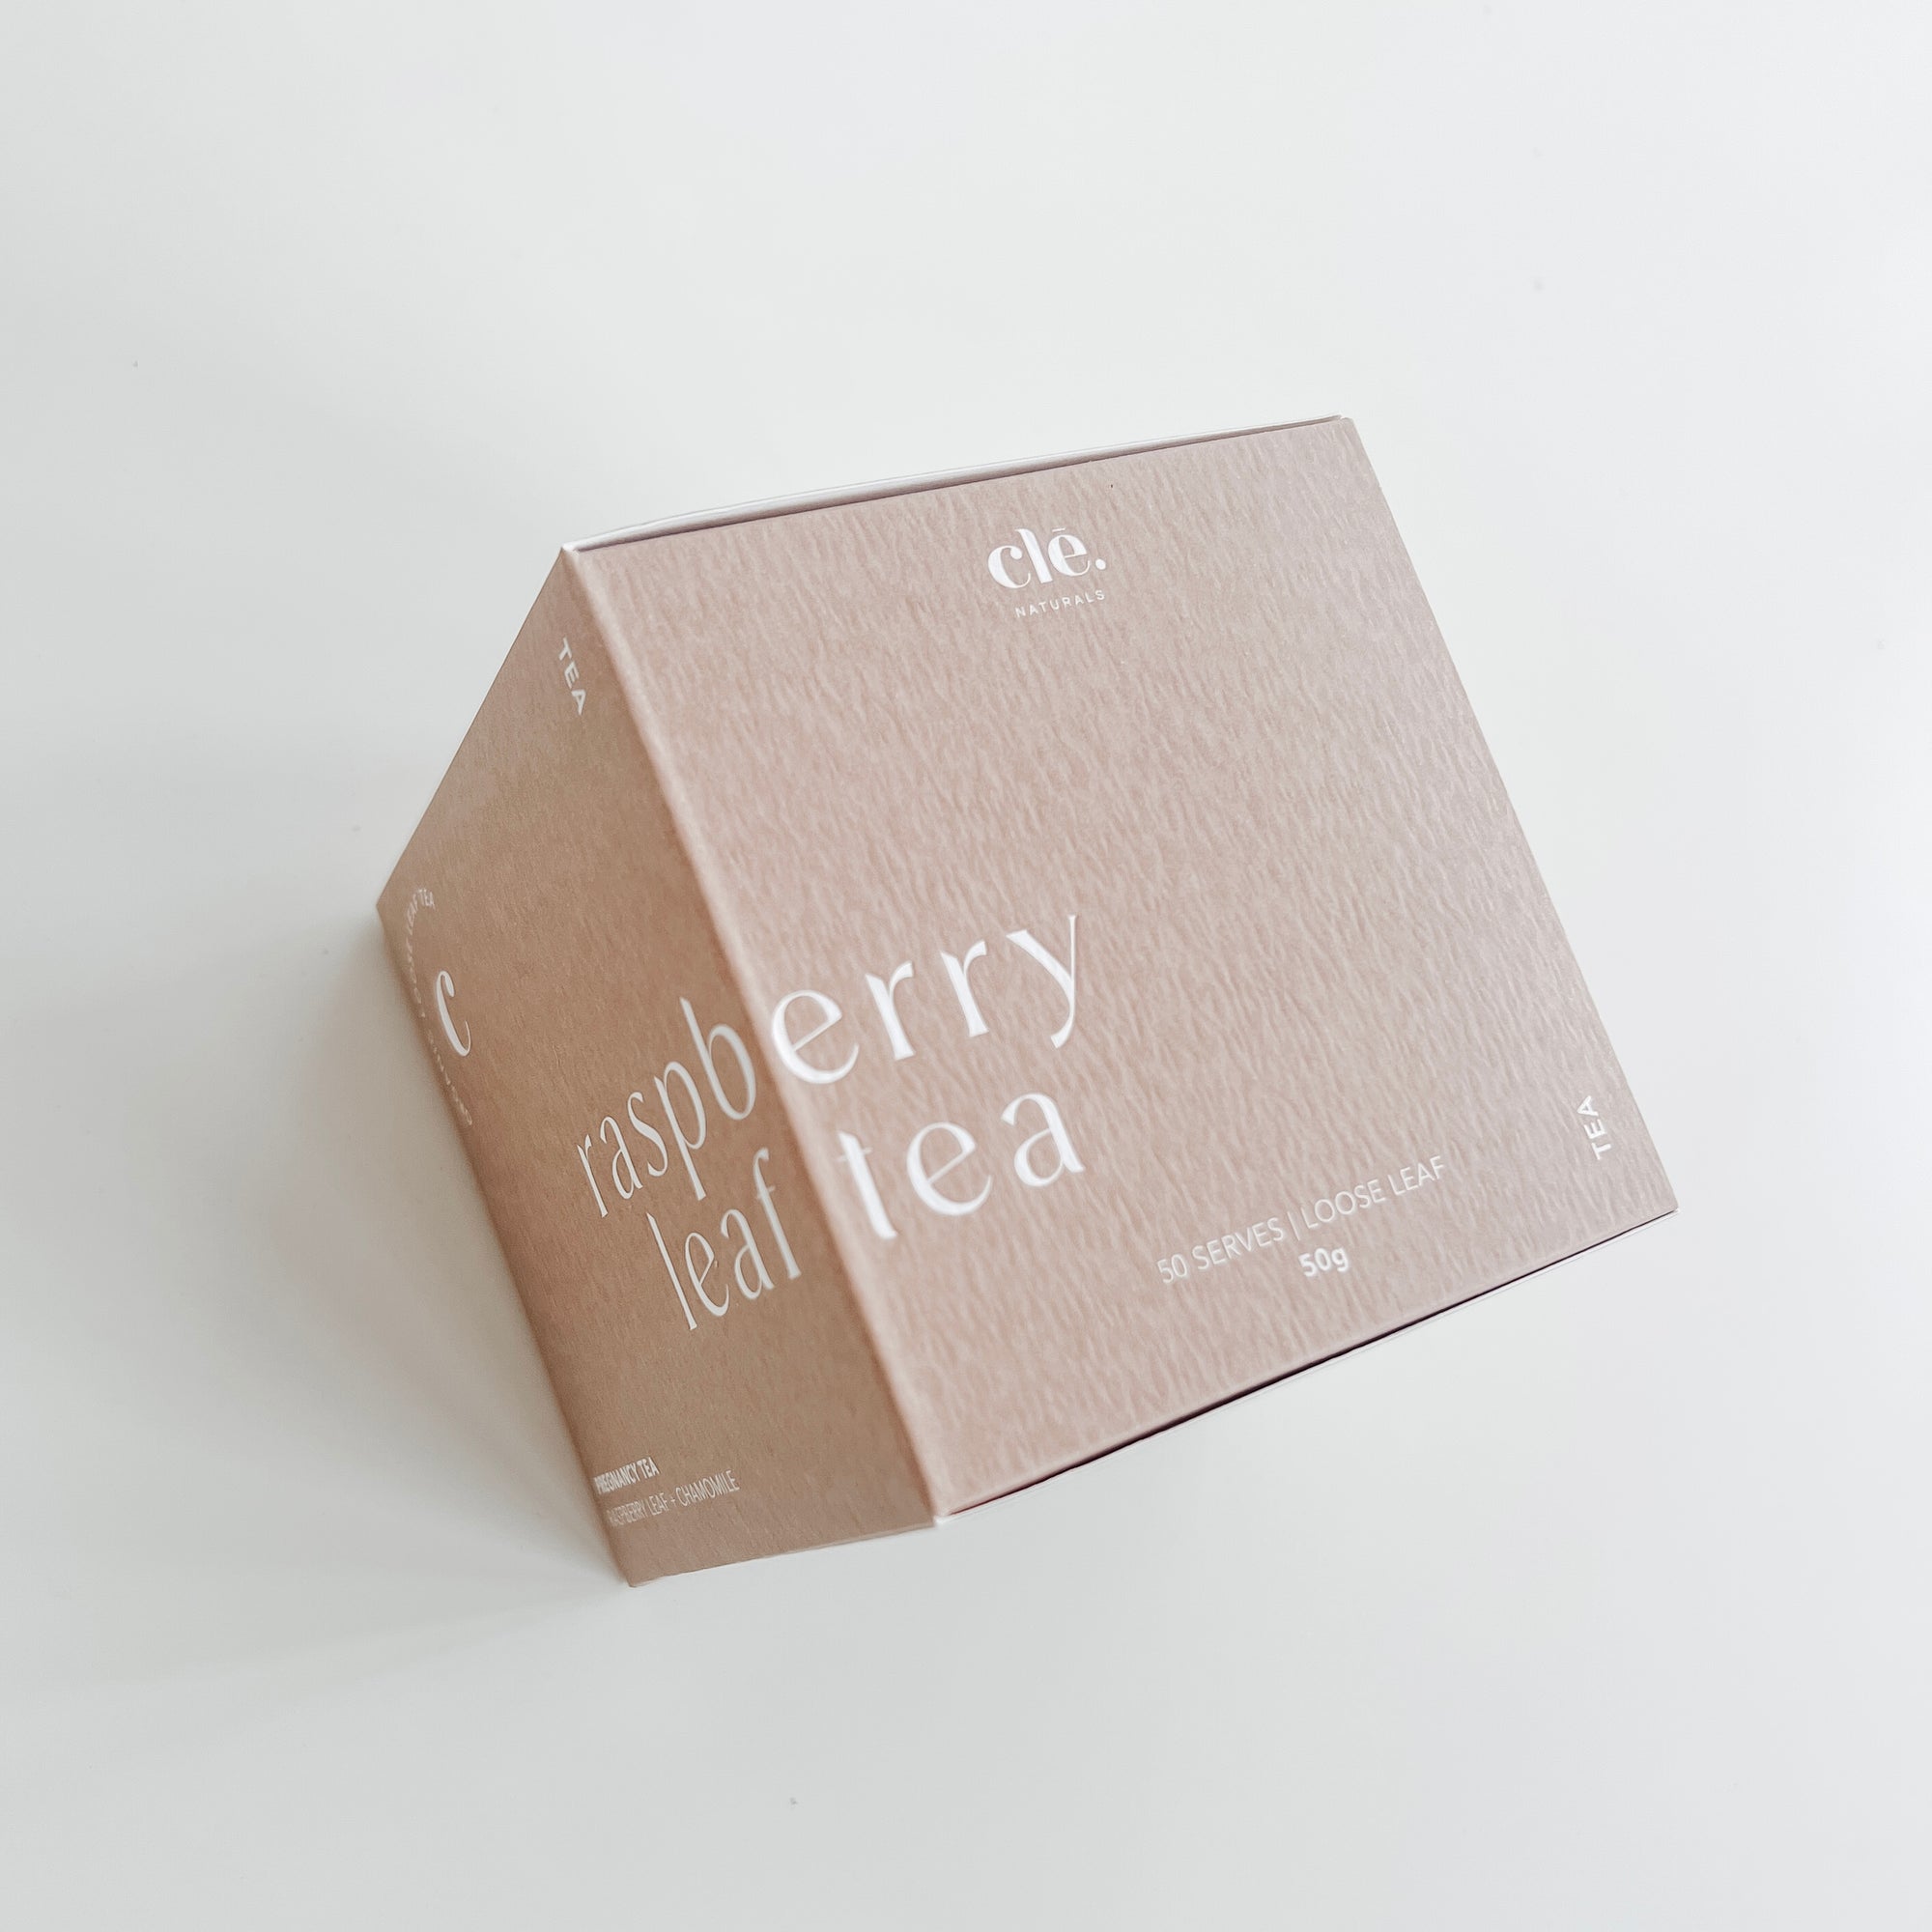 A pink cardboard box labeled "Clē Naturals certified organic raspberry leaf tea" with 40 servings, 50g weight indication, on a white background.